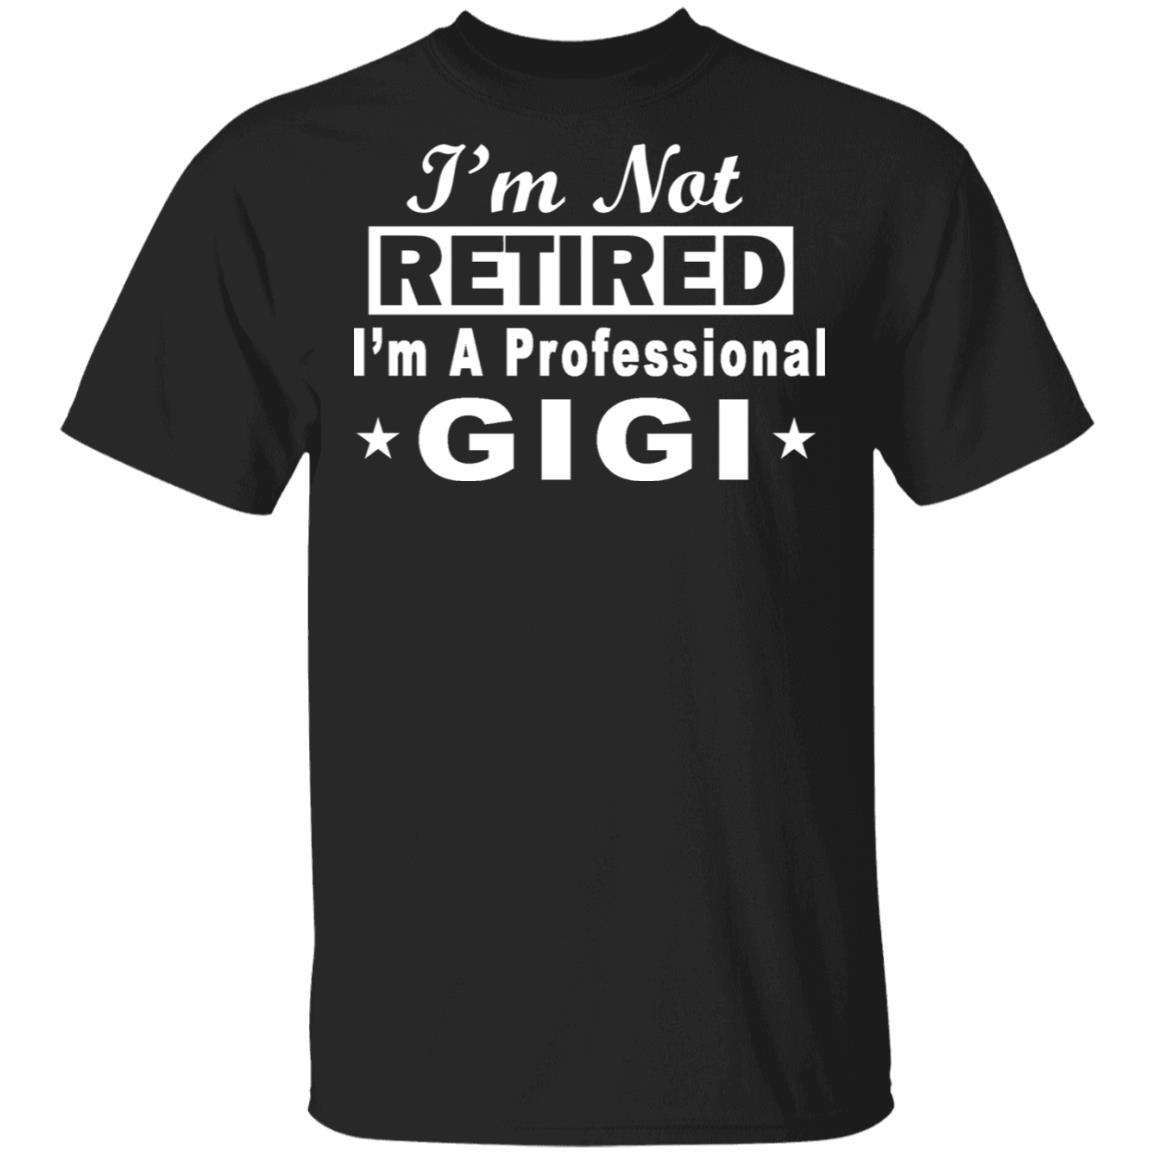 I'm Not Retired I'm A Professional Gigi T-shirt Mother's Day Gift